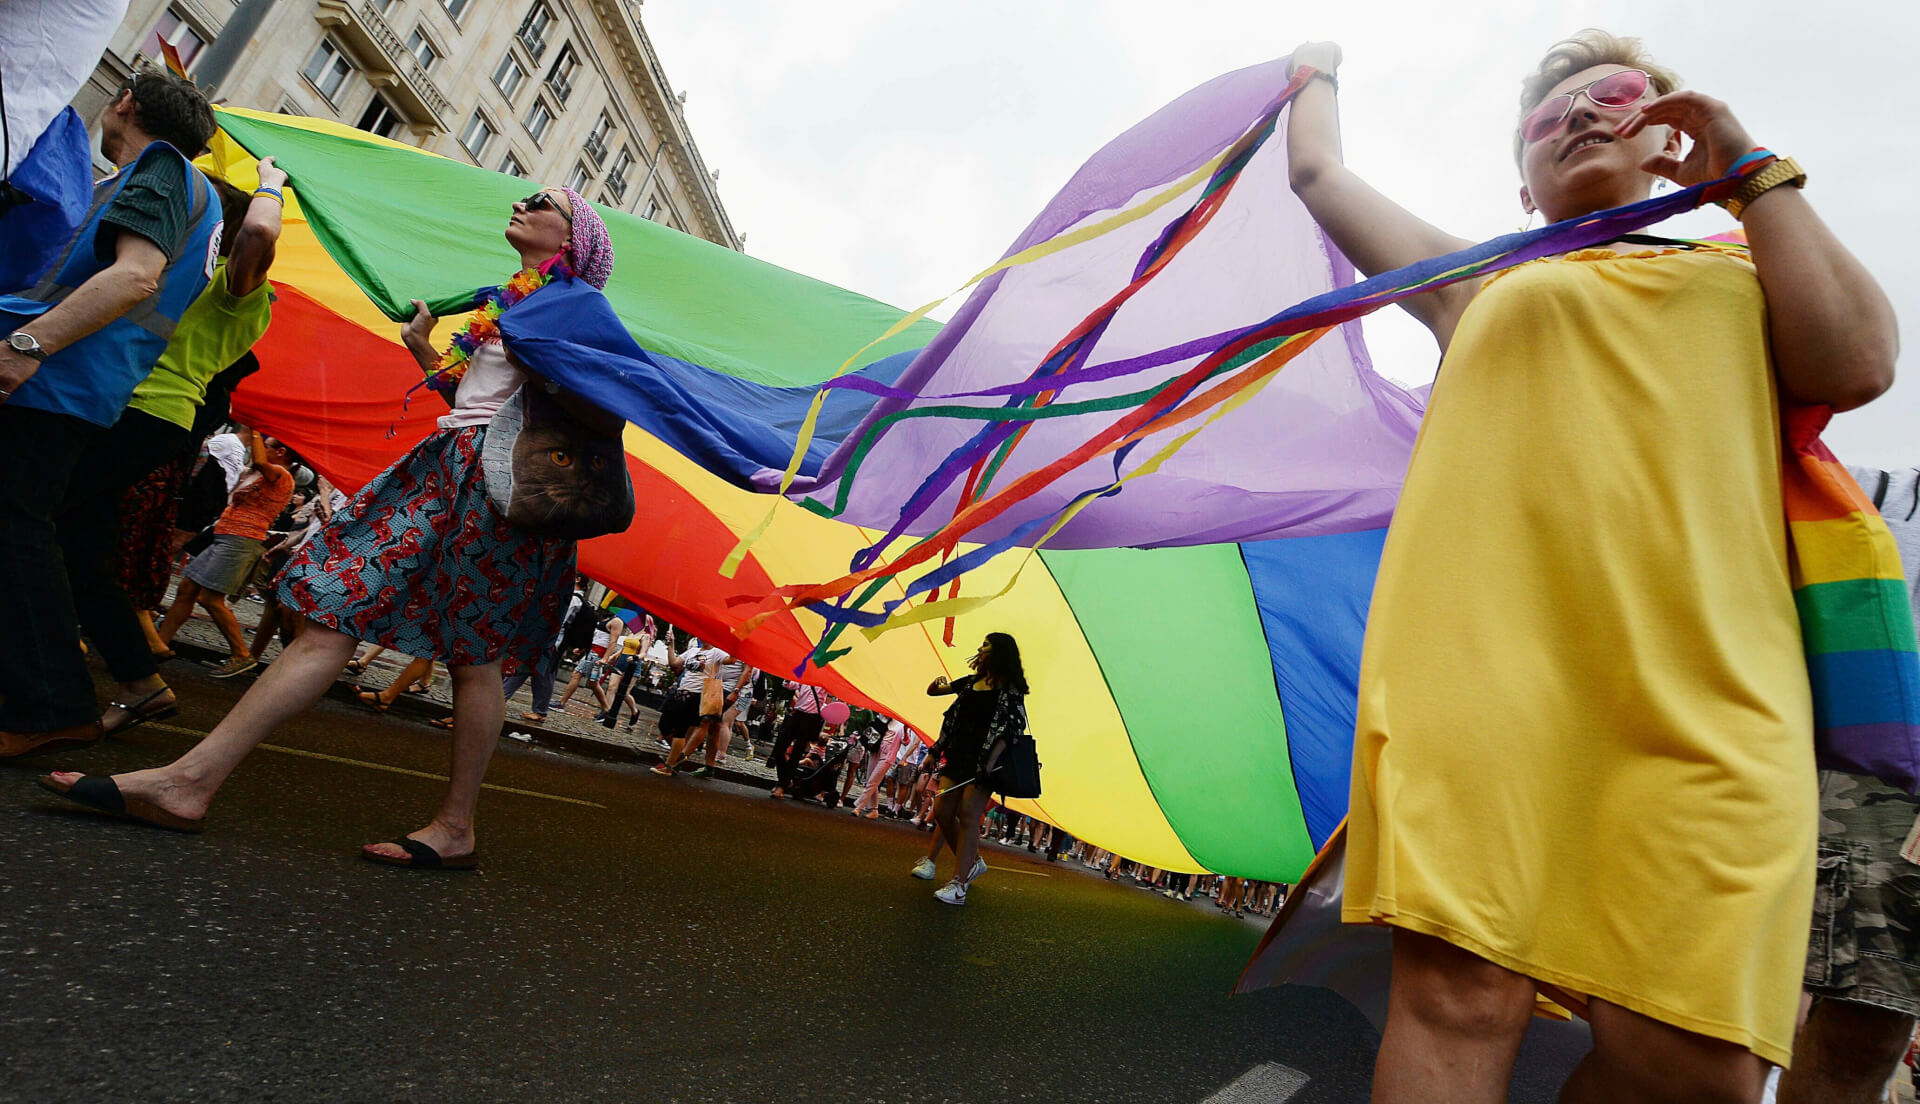 EU Threatens Poland With Legal Action Over “LGBT-Free” Zones